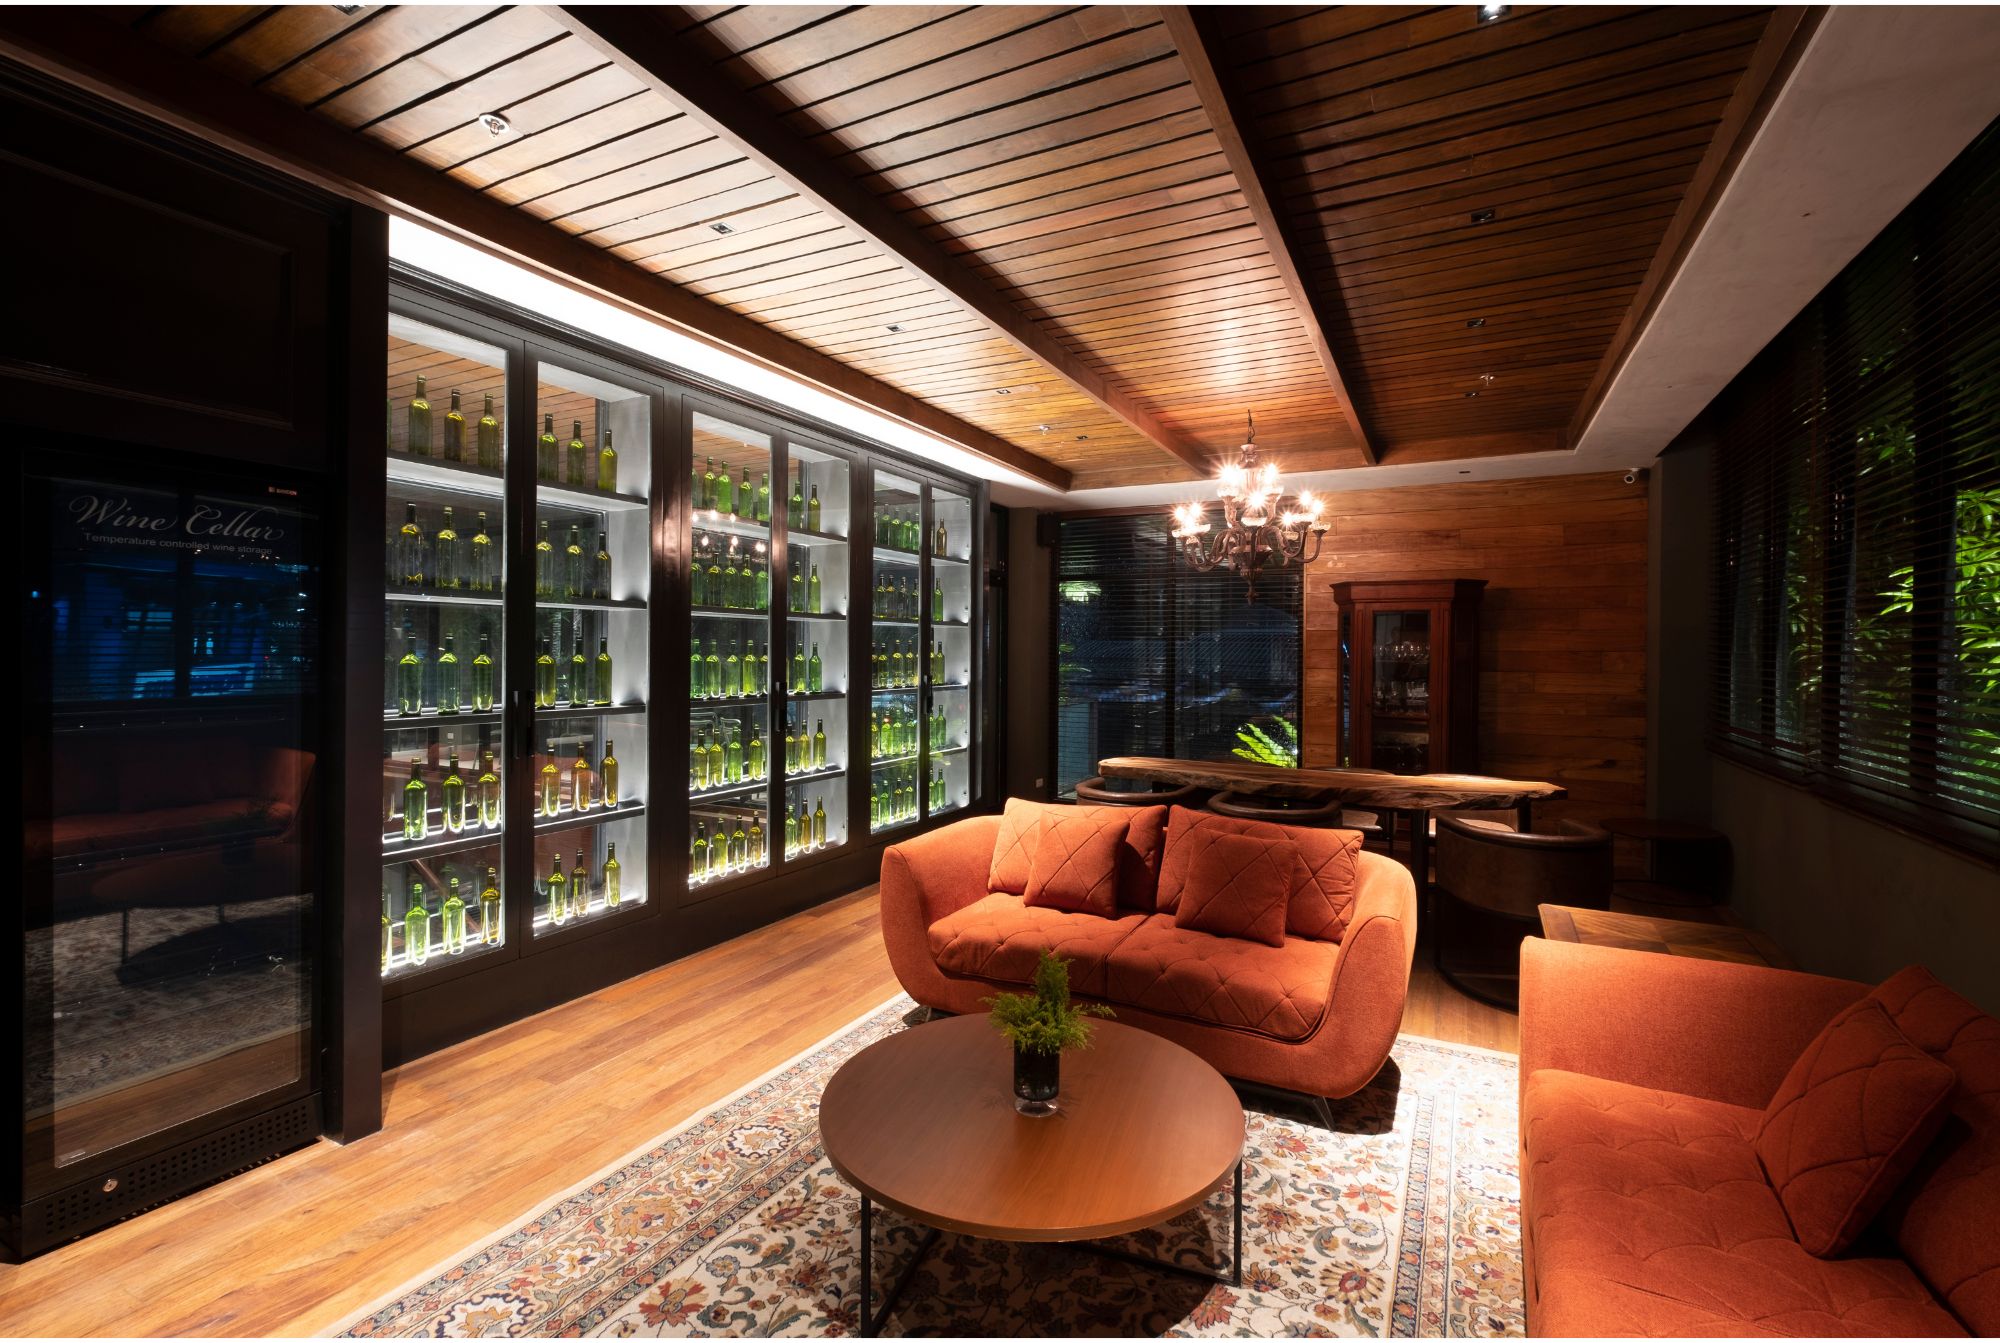 Cafe Bobs wine cellar with terracota colored seating, ornate rug, and large glass display case filled with wine bottles.